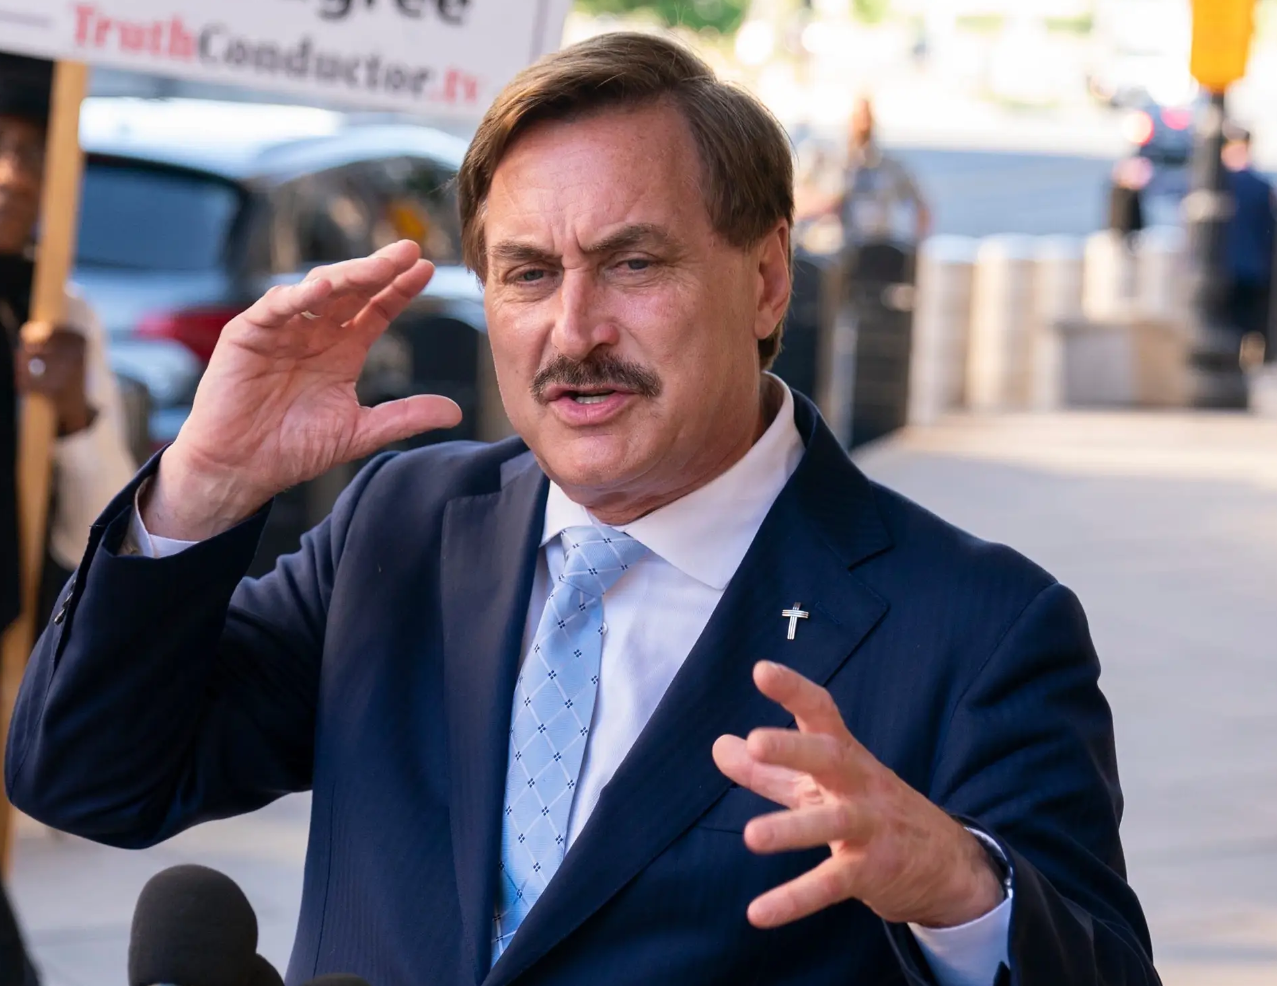 Winner of ‘Prove Mike Wrong’ contest takes Mike Lindell to court for $5 million after successfully proving him wrong